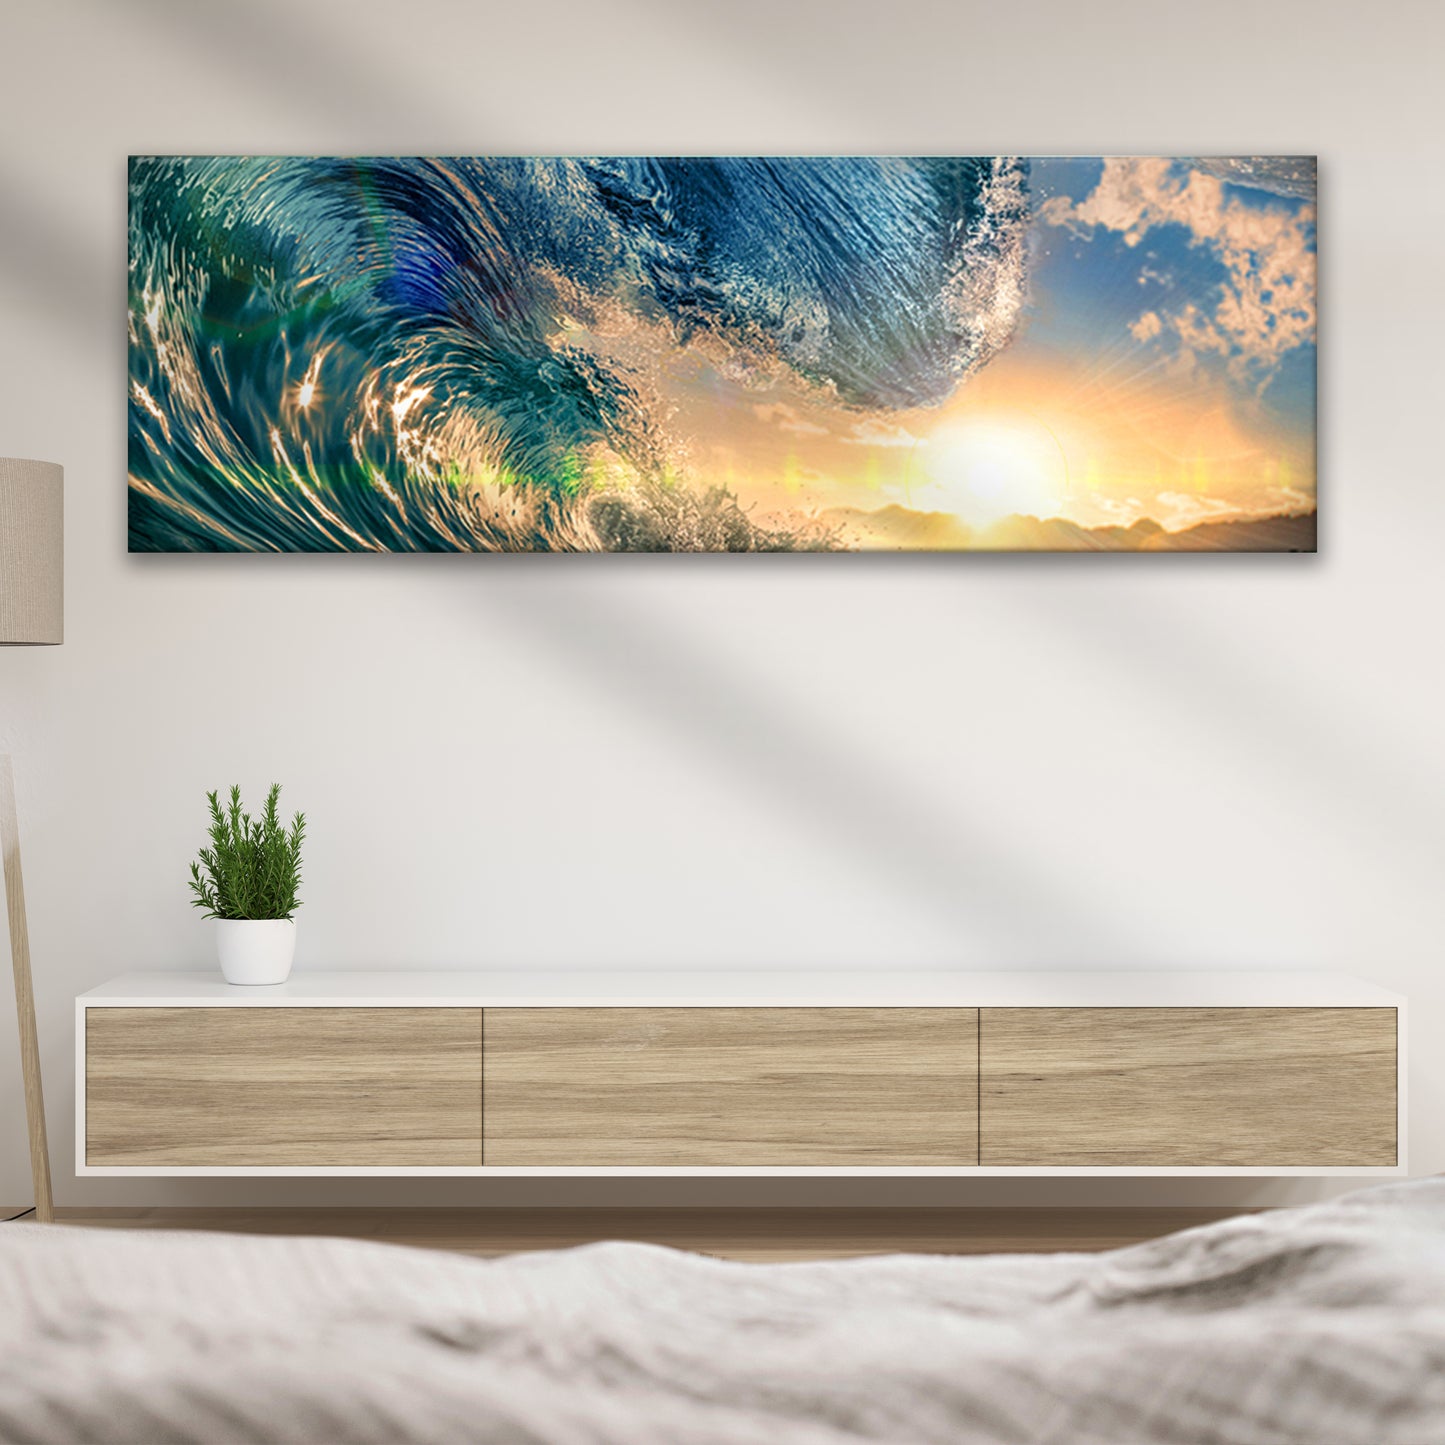 Ocean Waves Canvas Wall Art - Image by Tailored Canvases